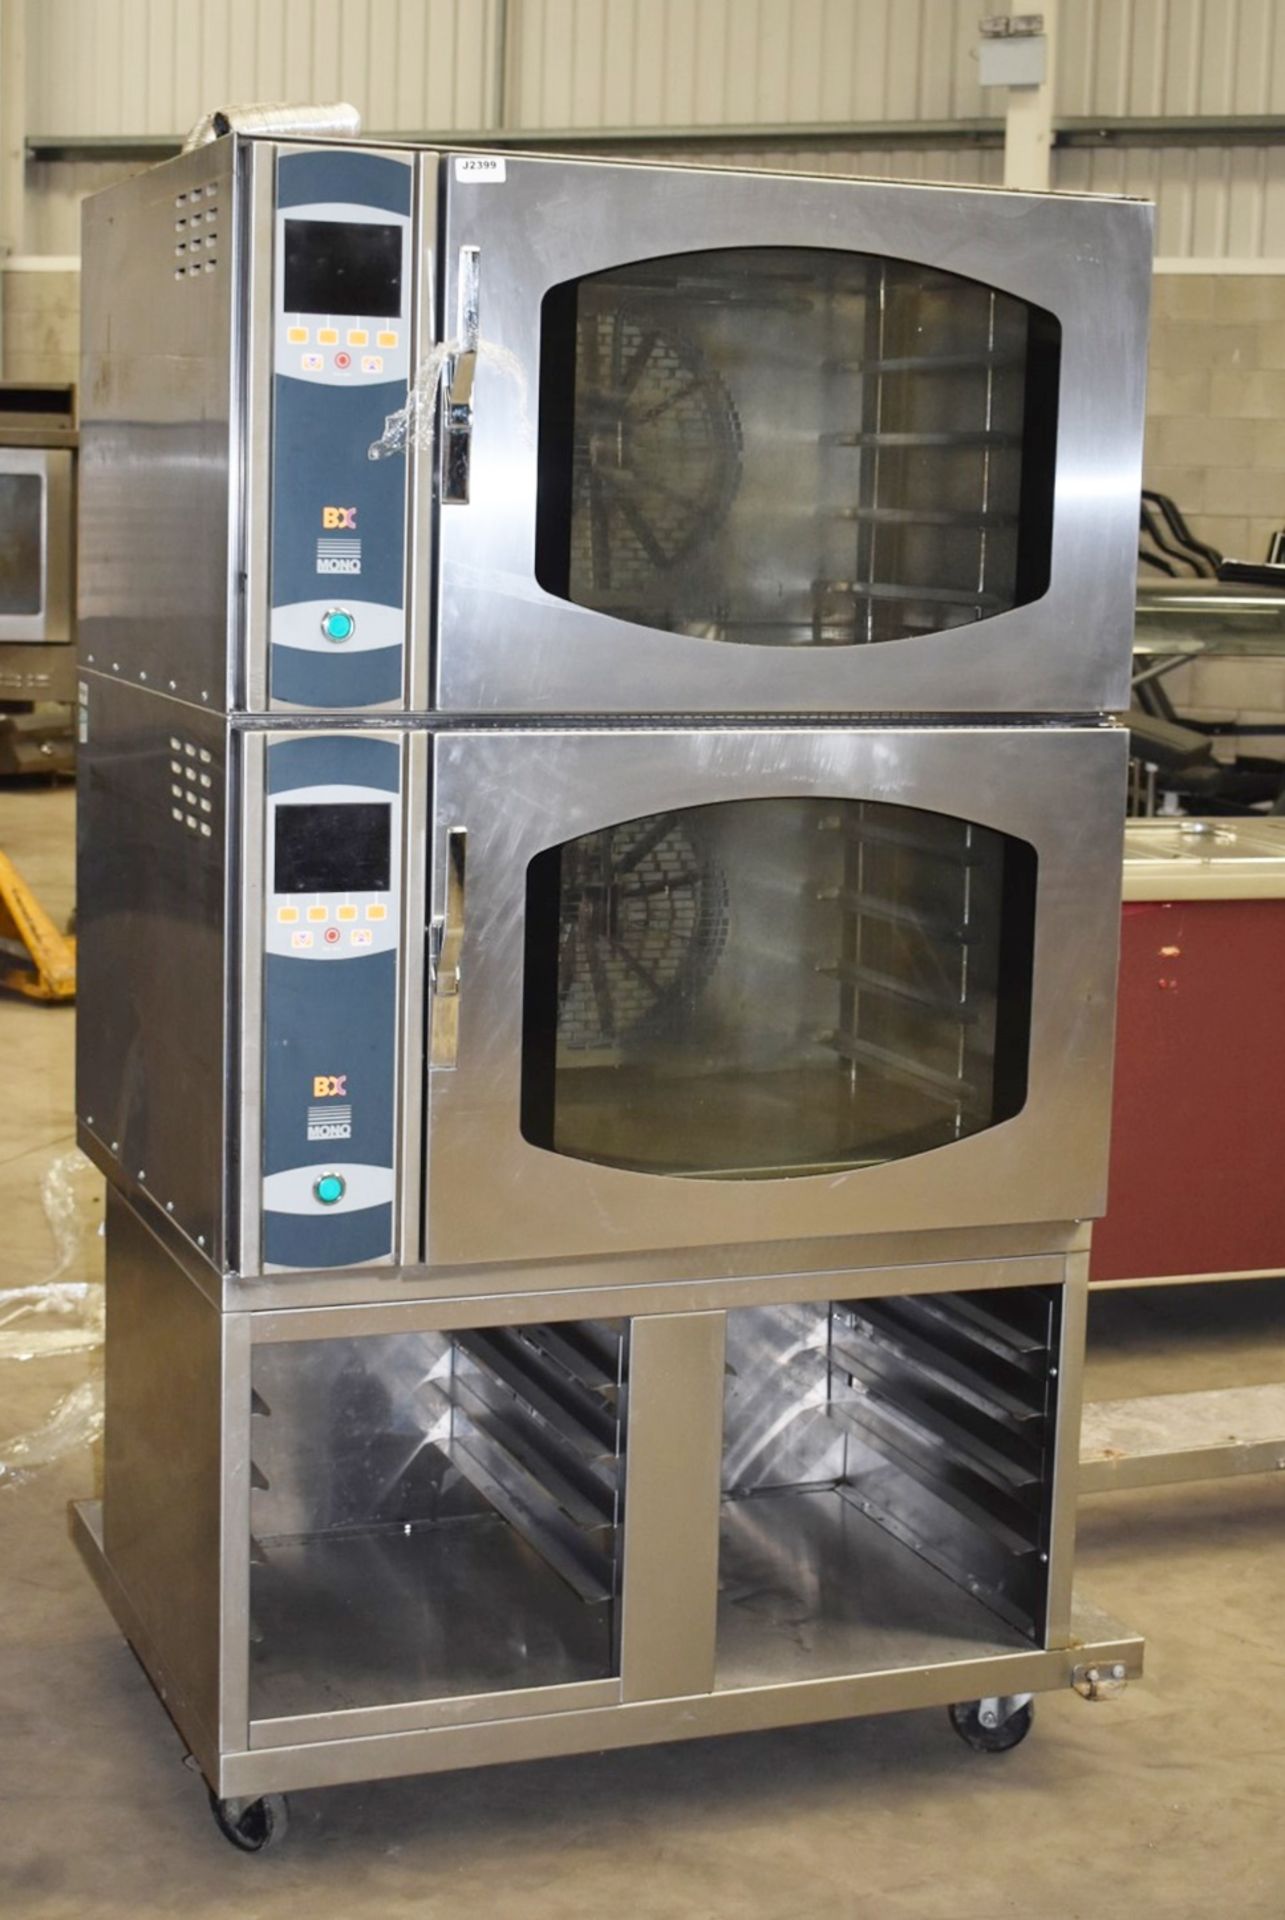 1 x Mono FG158 Double Commercial Bakery Convection Oven - 3 Phase - Ex M&S - H180 x W100 x D85 cms - - Image 4 of 10